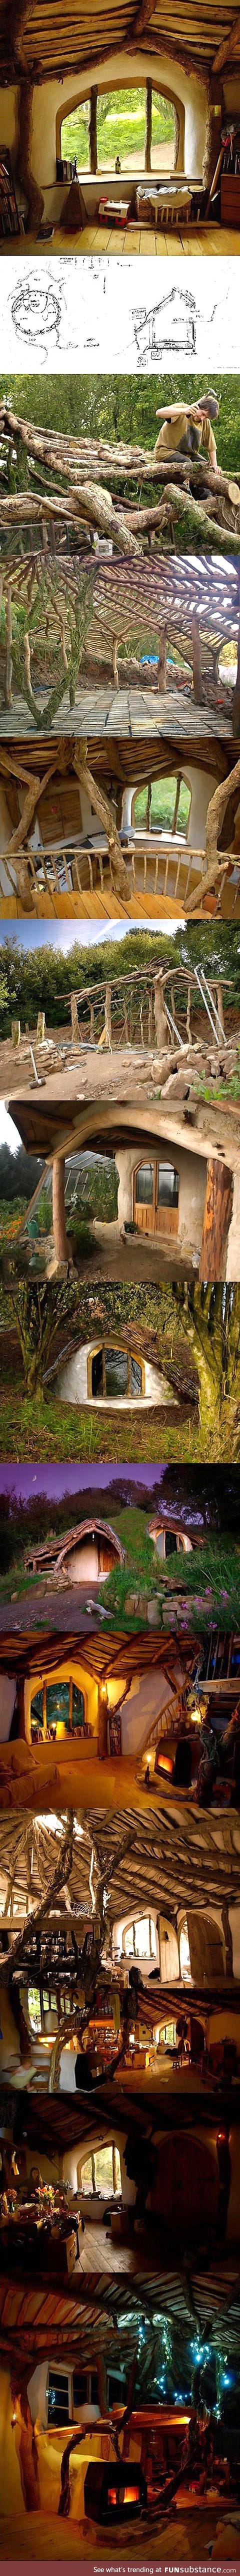 Here's How To Build A Hobbit House